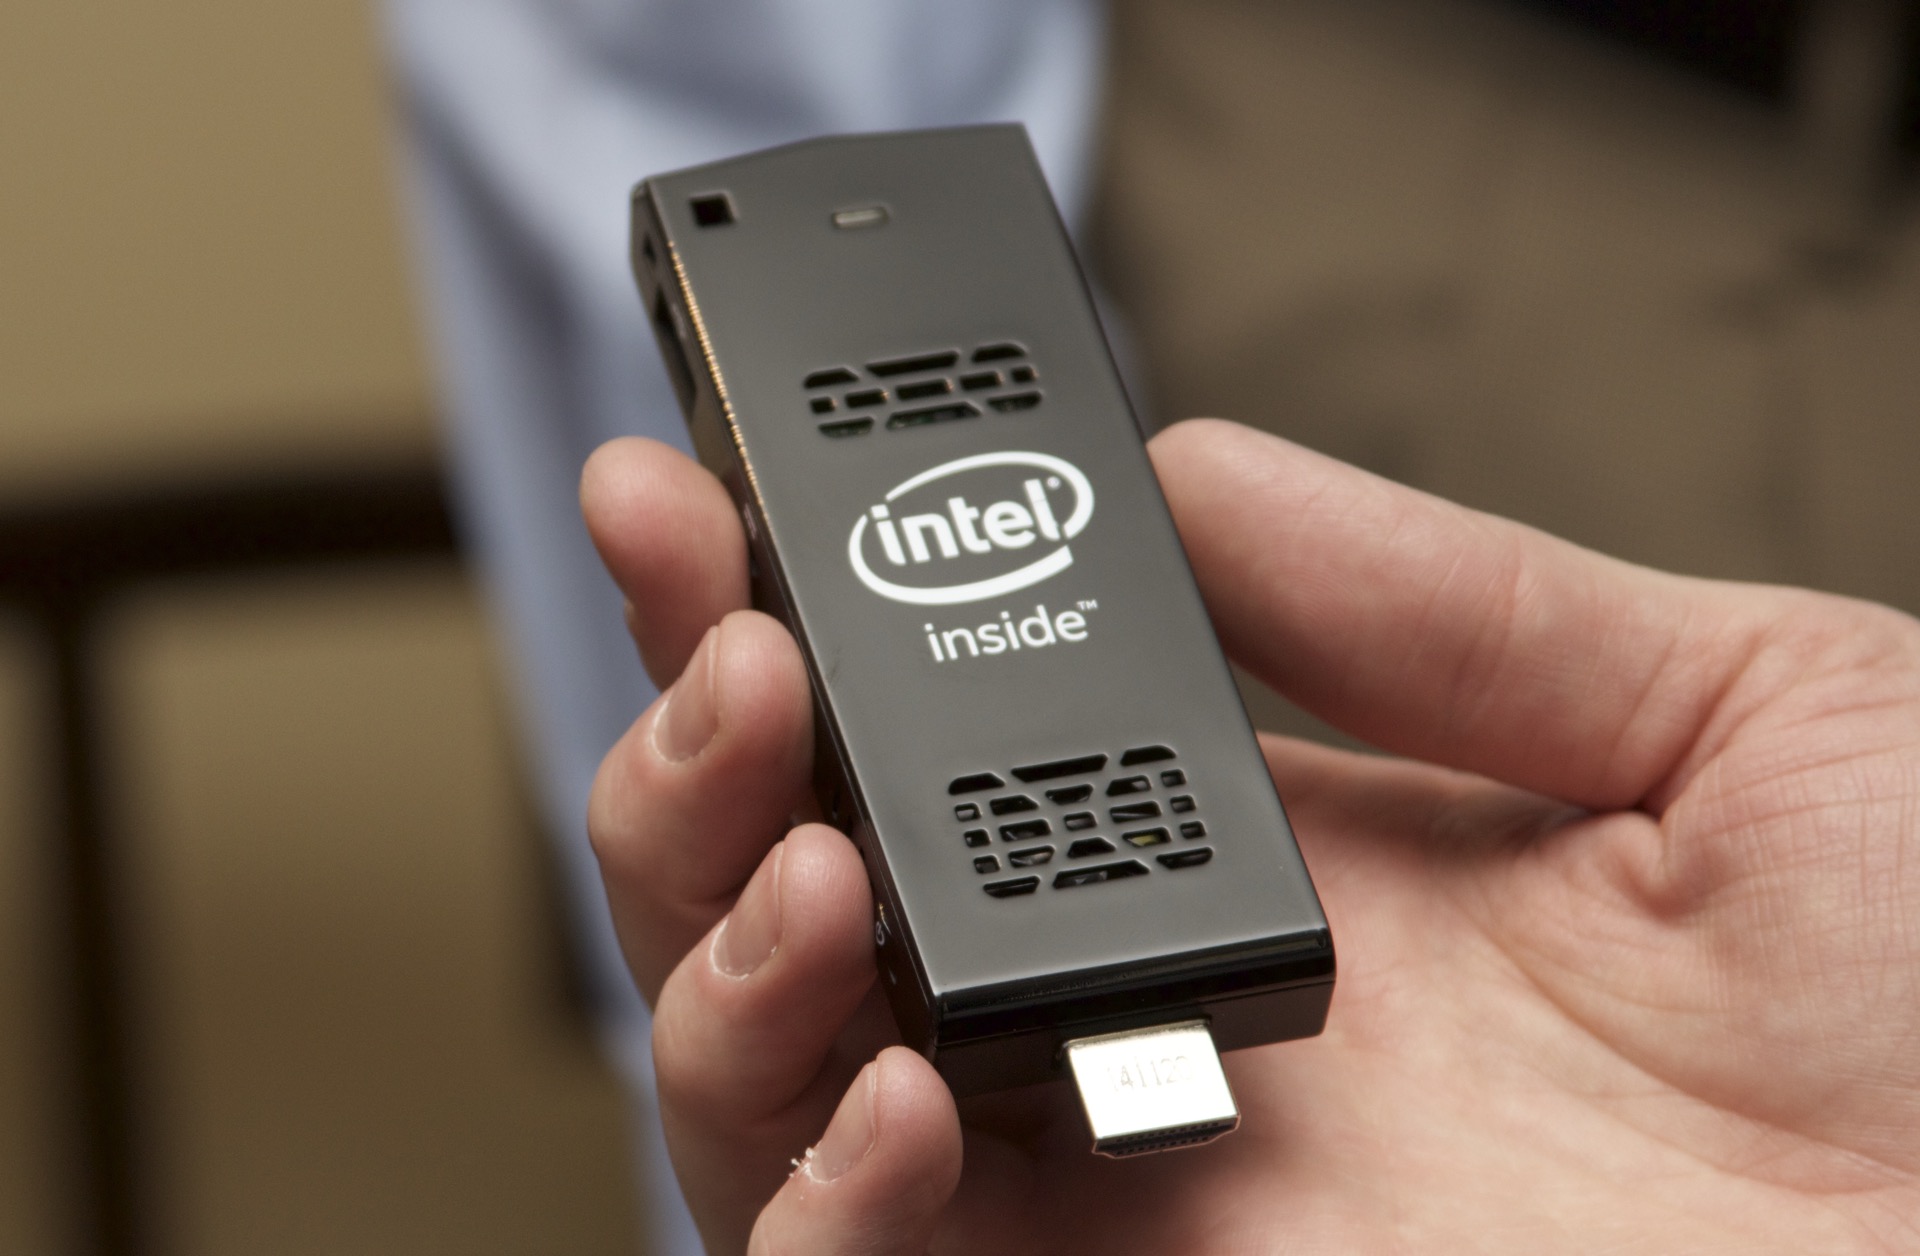 Intel Compute Stick – PC in a Dongle